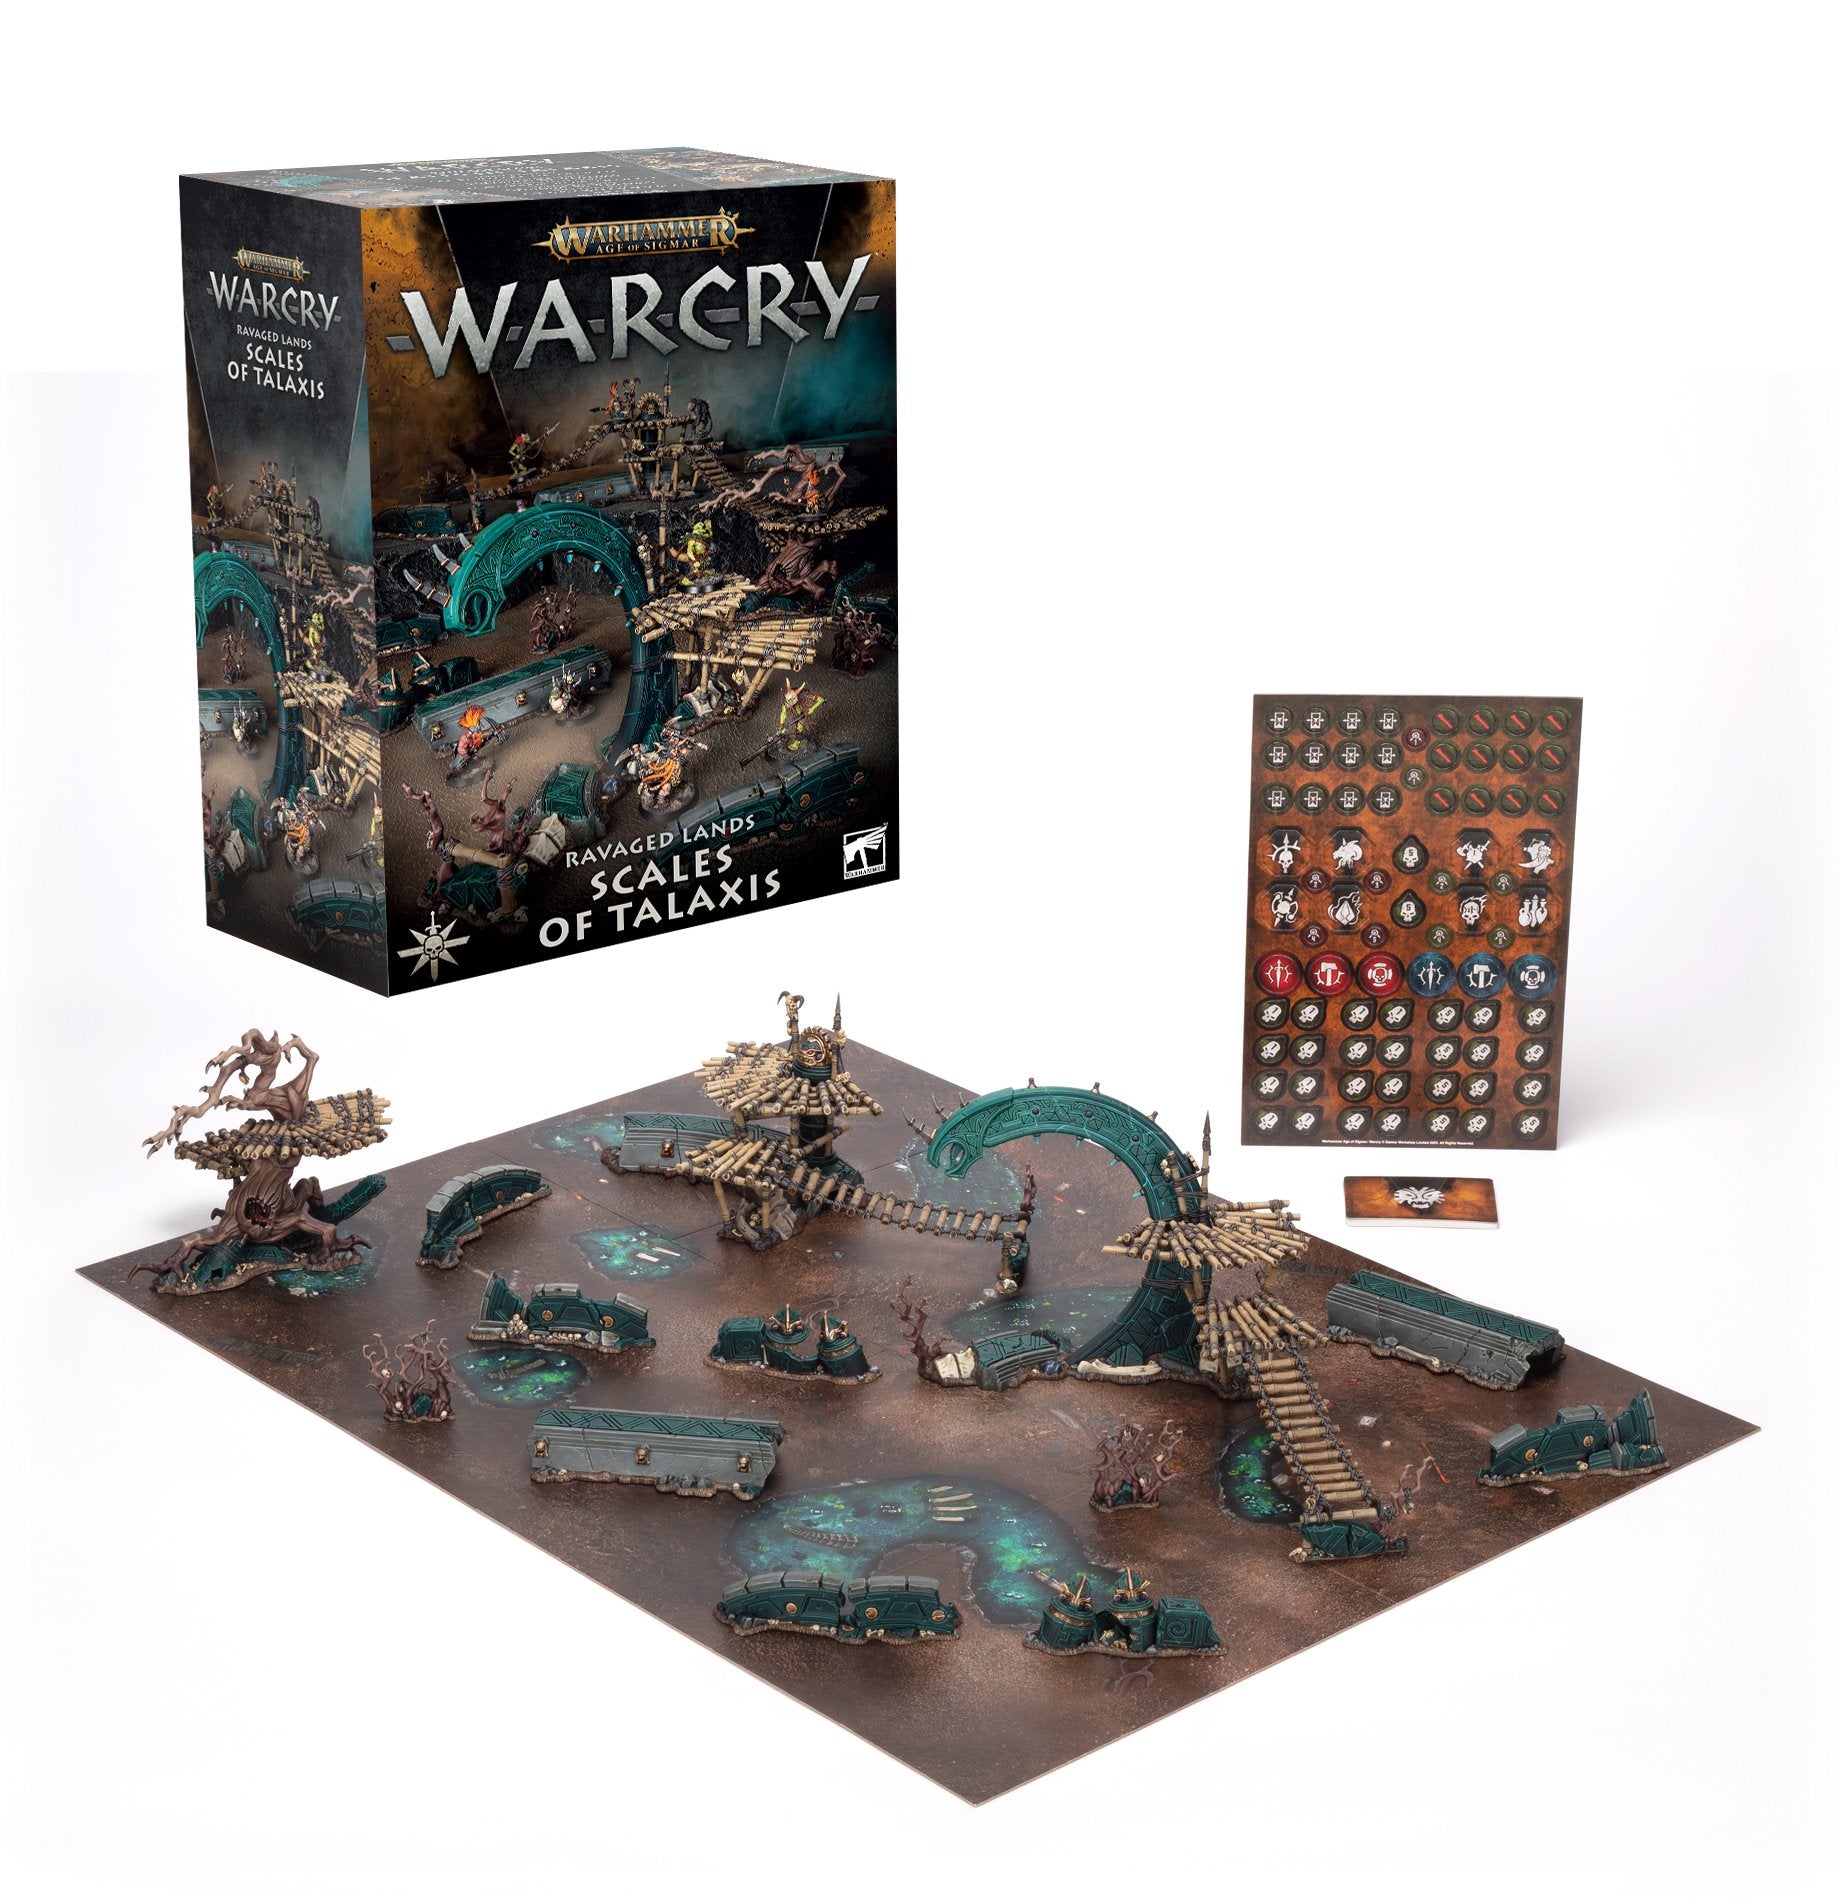 Warcry: Scales of Talaxis - Release Date 21/10/23 - Loaded Dice Barry Vale of Glamorgan CF64 3HD